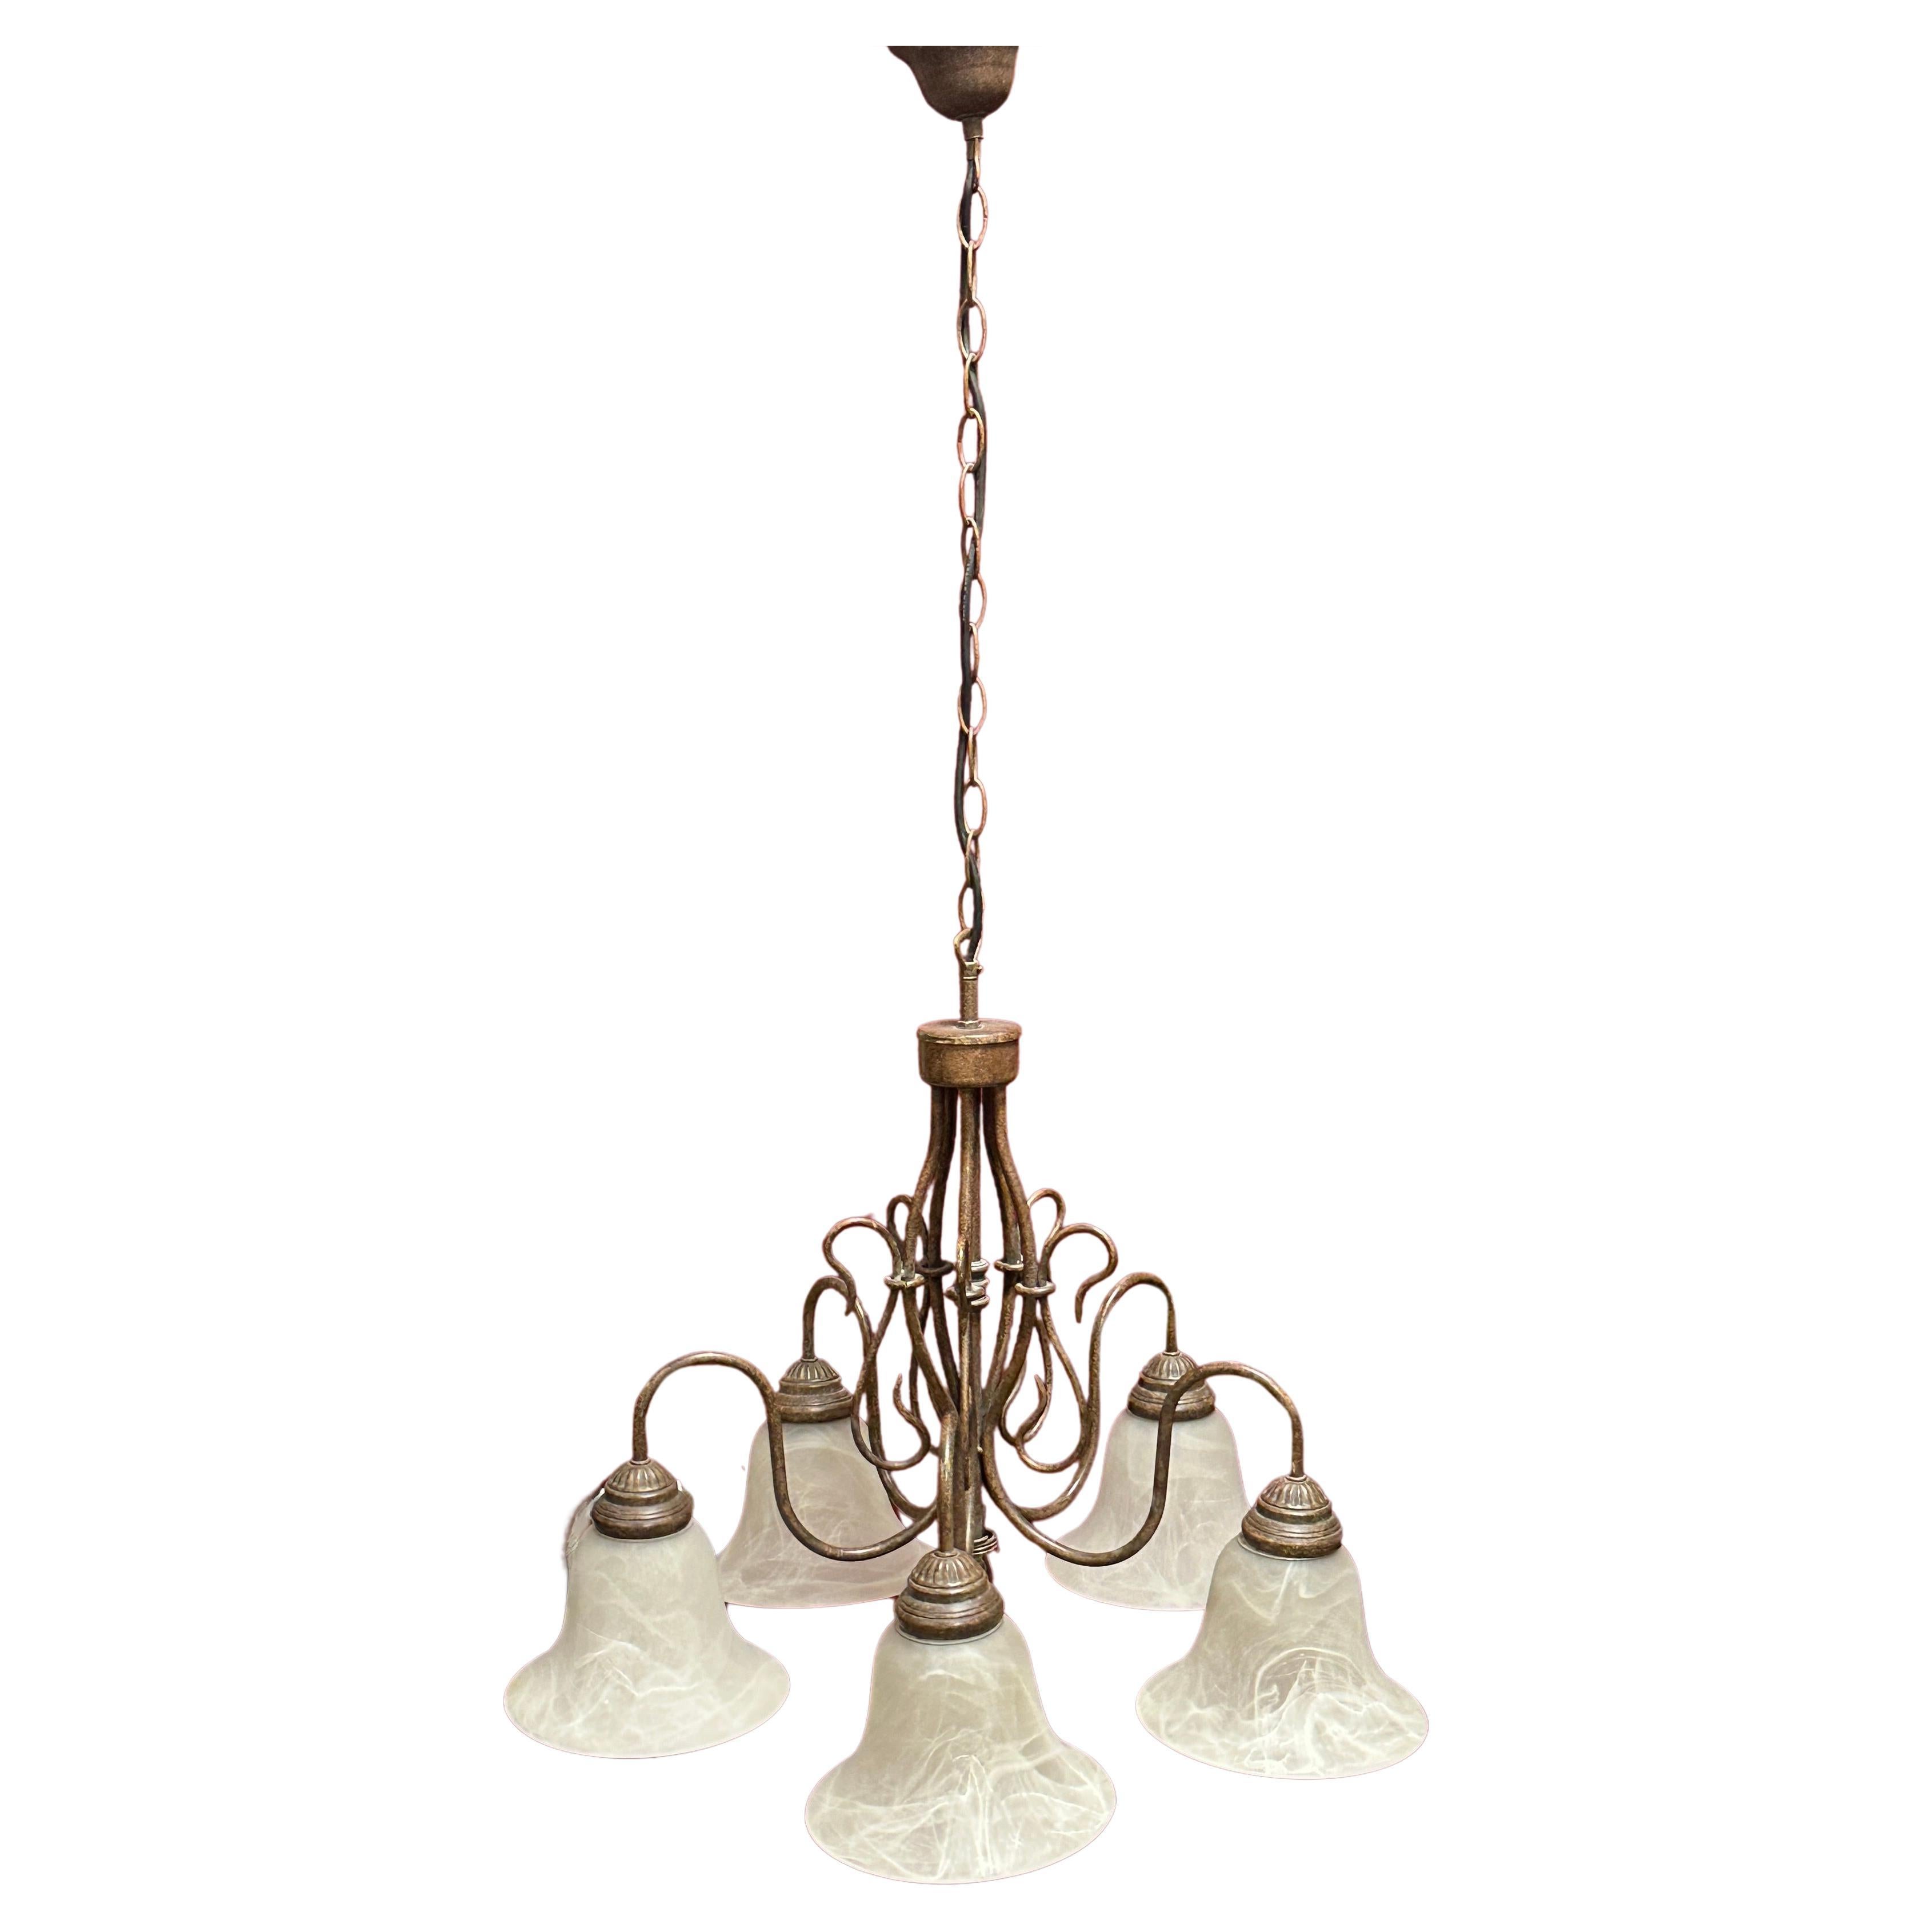 Gorgeous Metal and Glas Shade Five Light Chandelier, Farm House Style 1980s For Sale